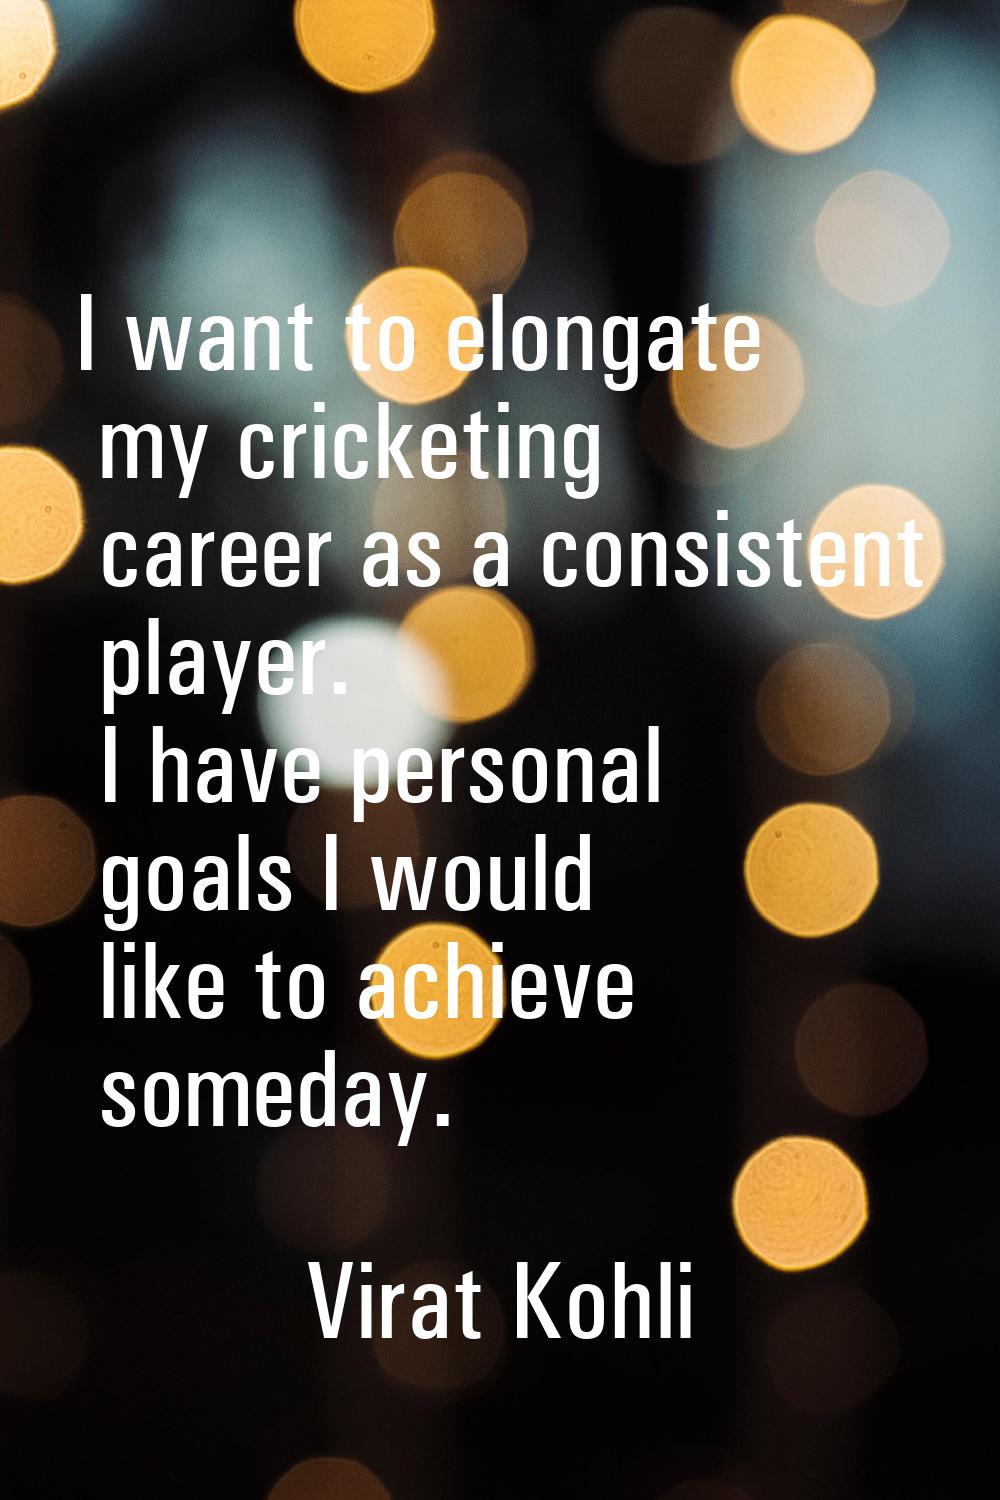 I want to elongate my cricketing career as a consistent player. I have personal goals I would like 